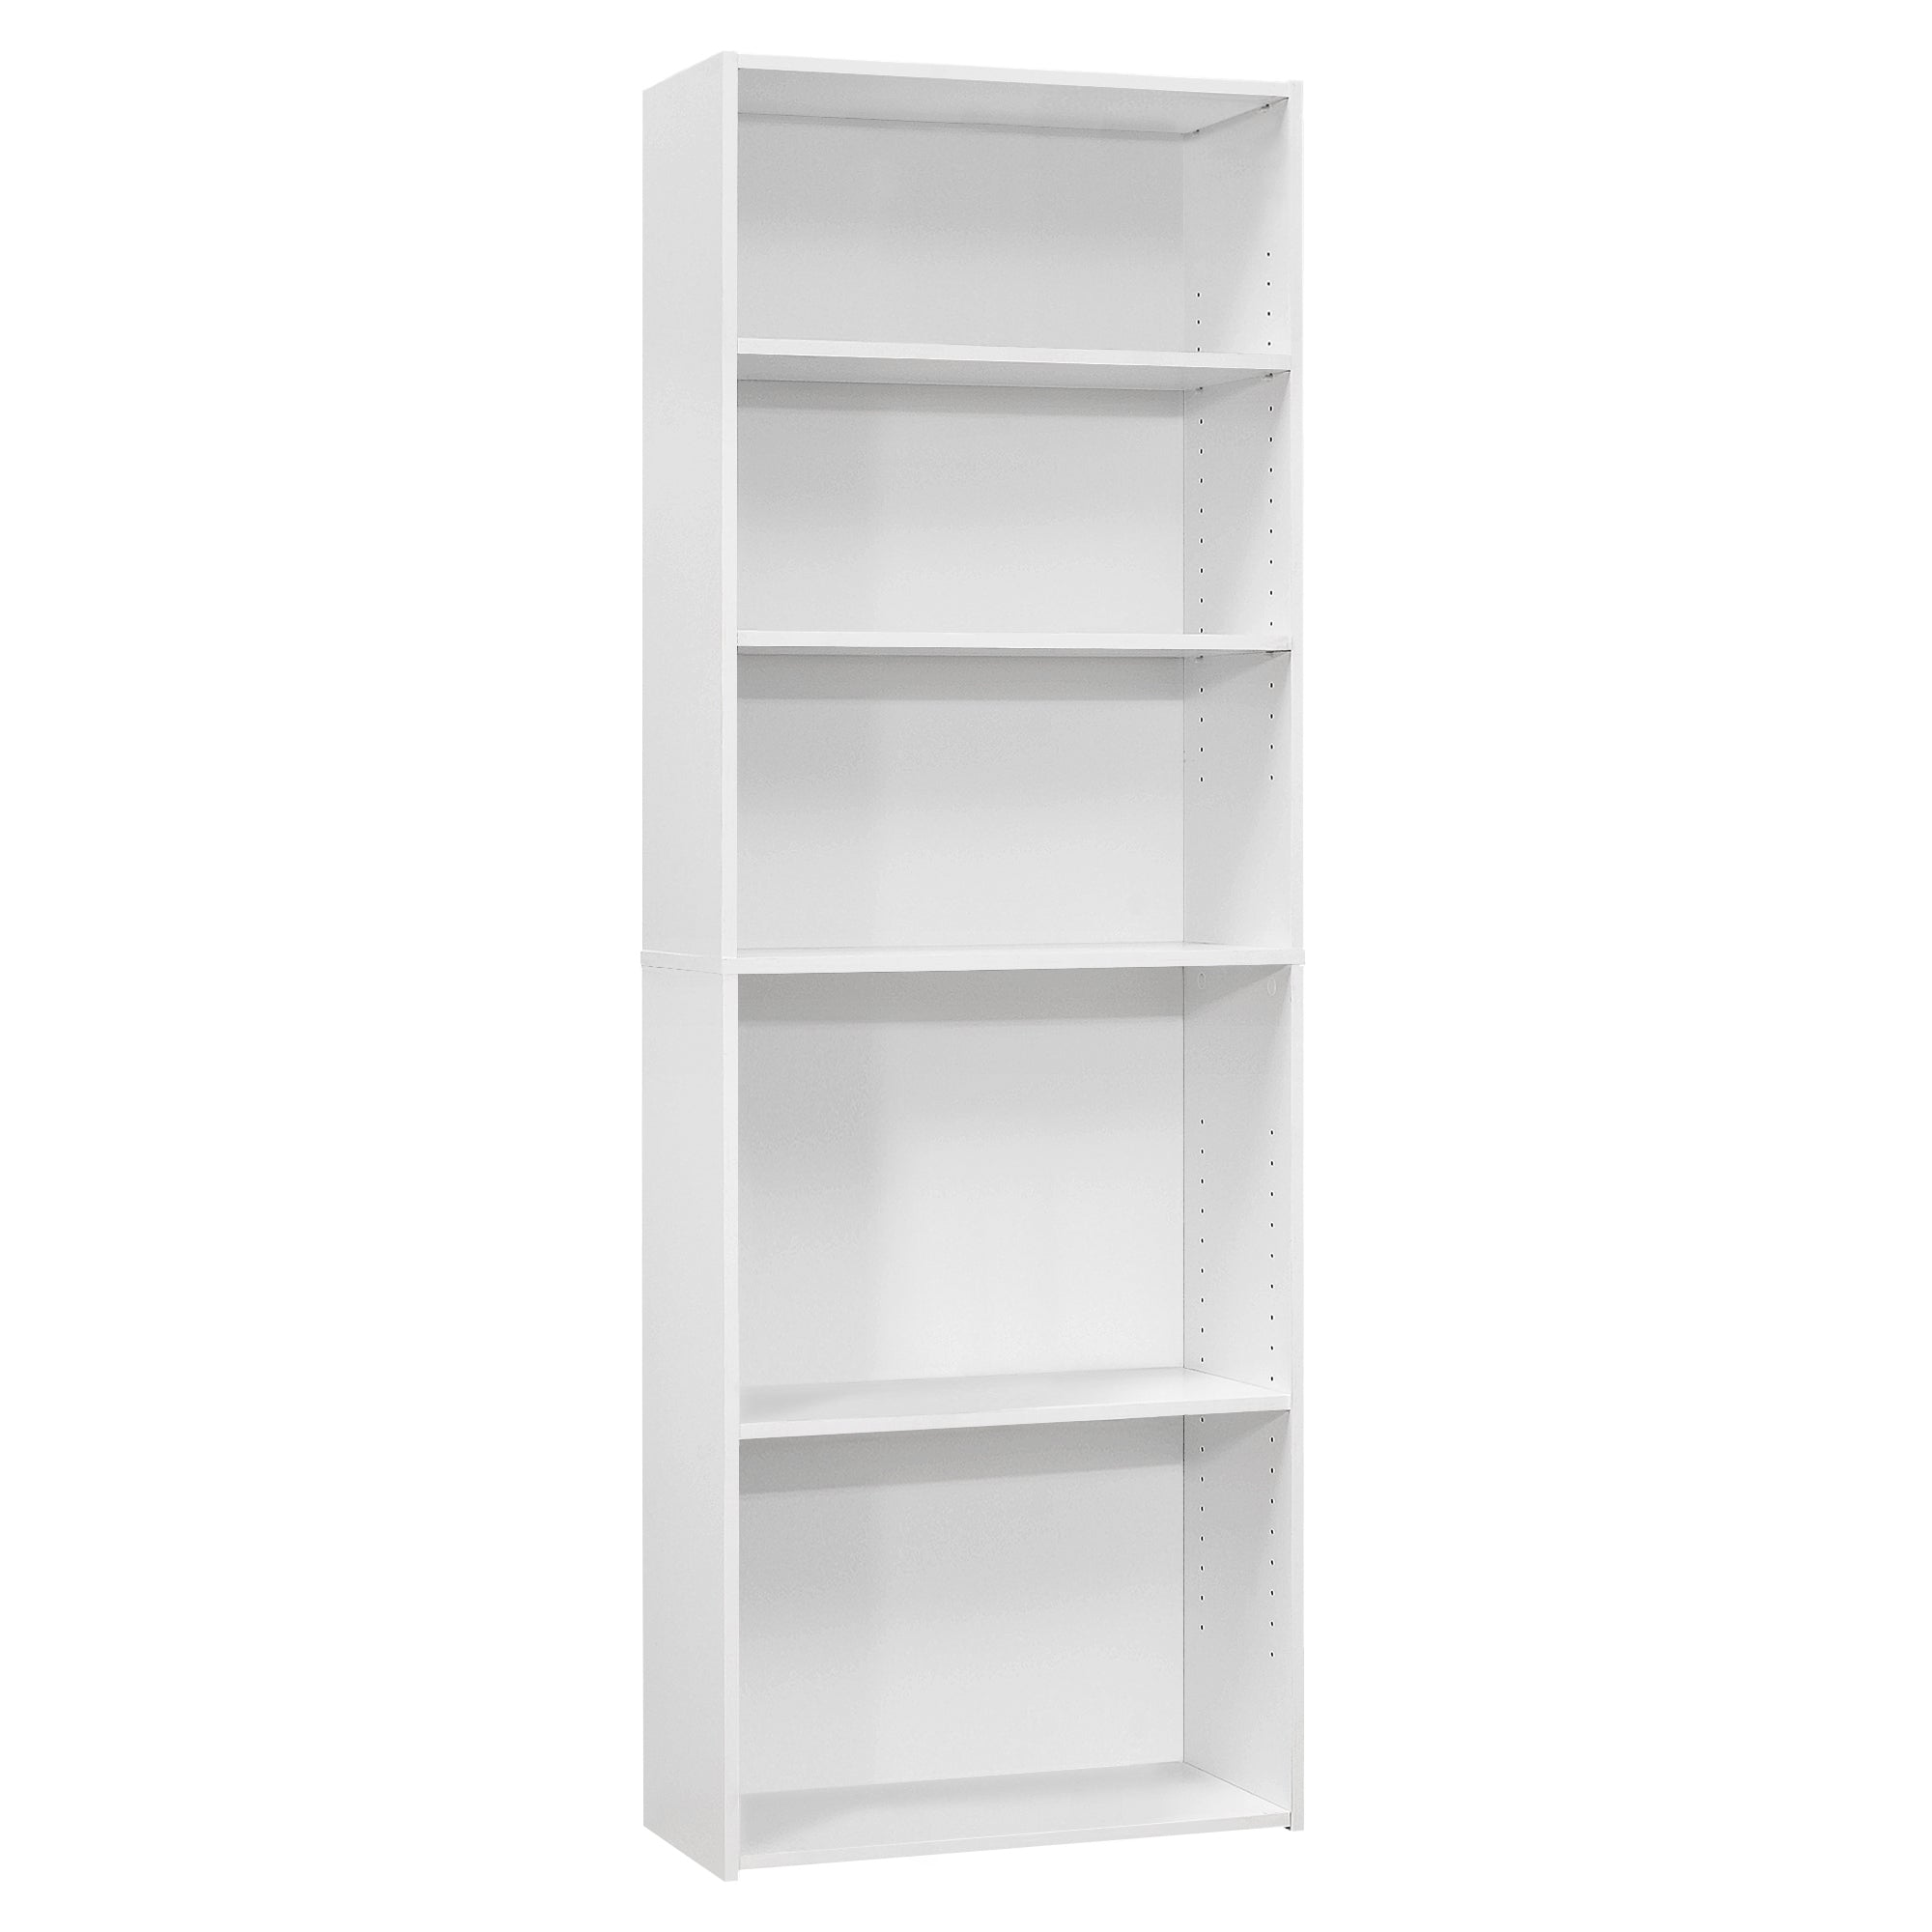 BOOKCASE - 72"H / CHERRY WITH 5 SHELVES